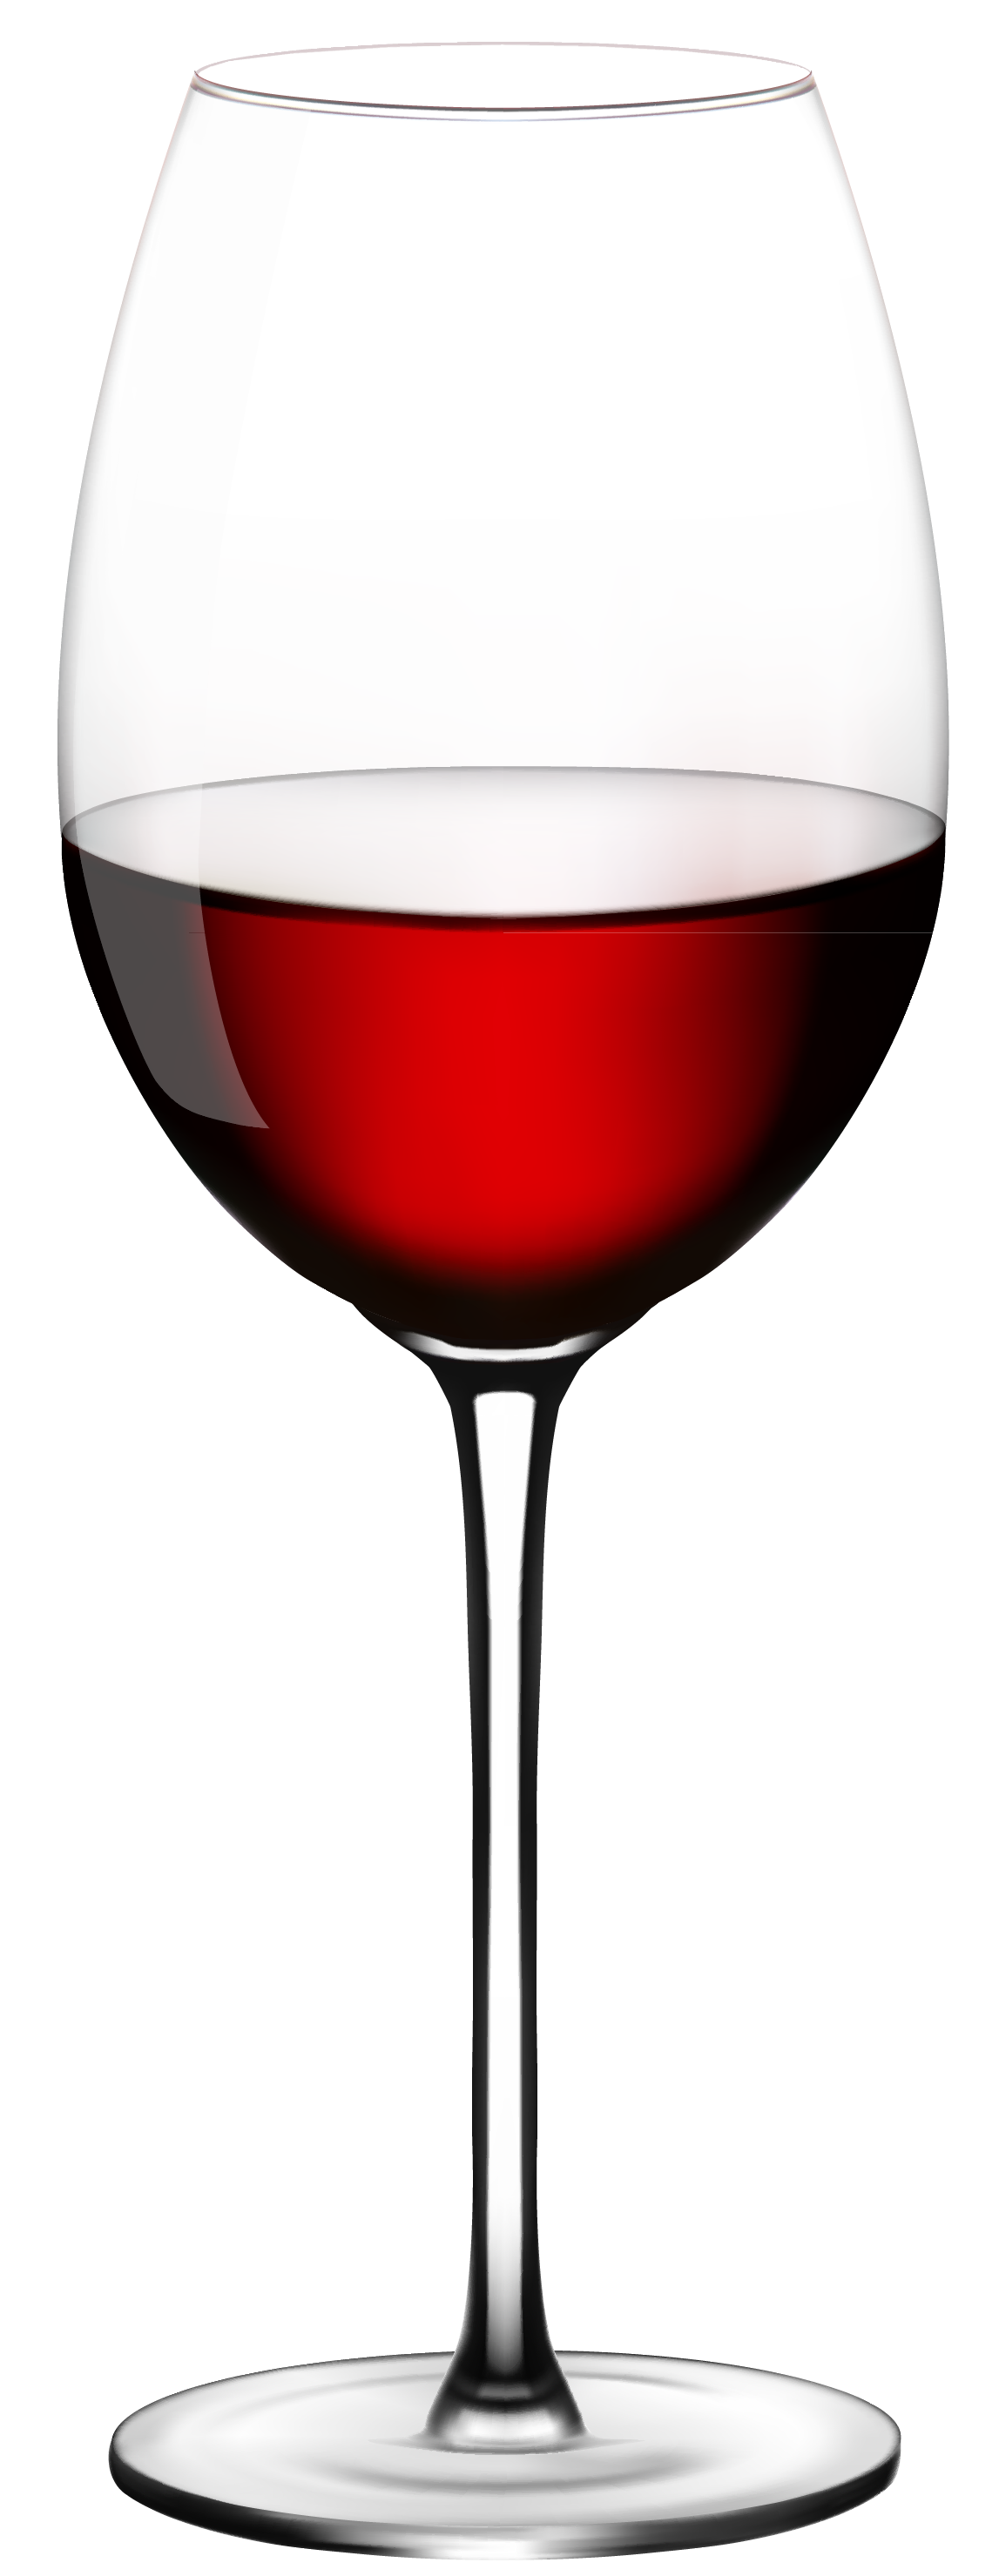 clipart glass of wine - photo #23